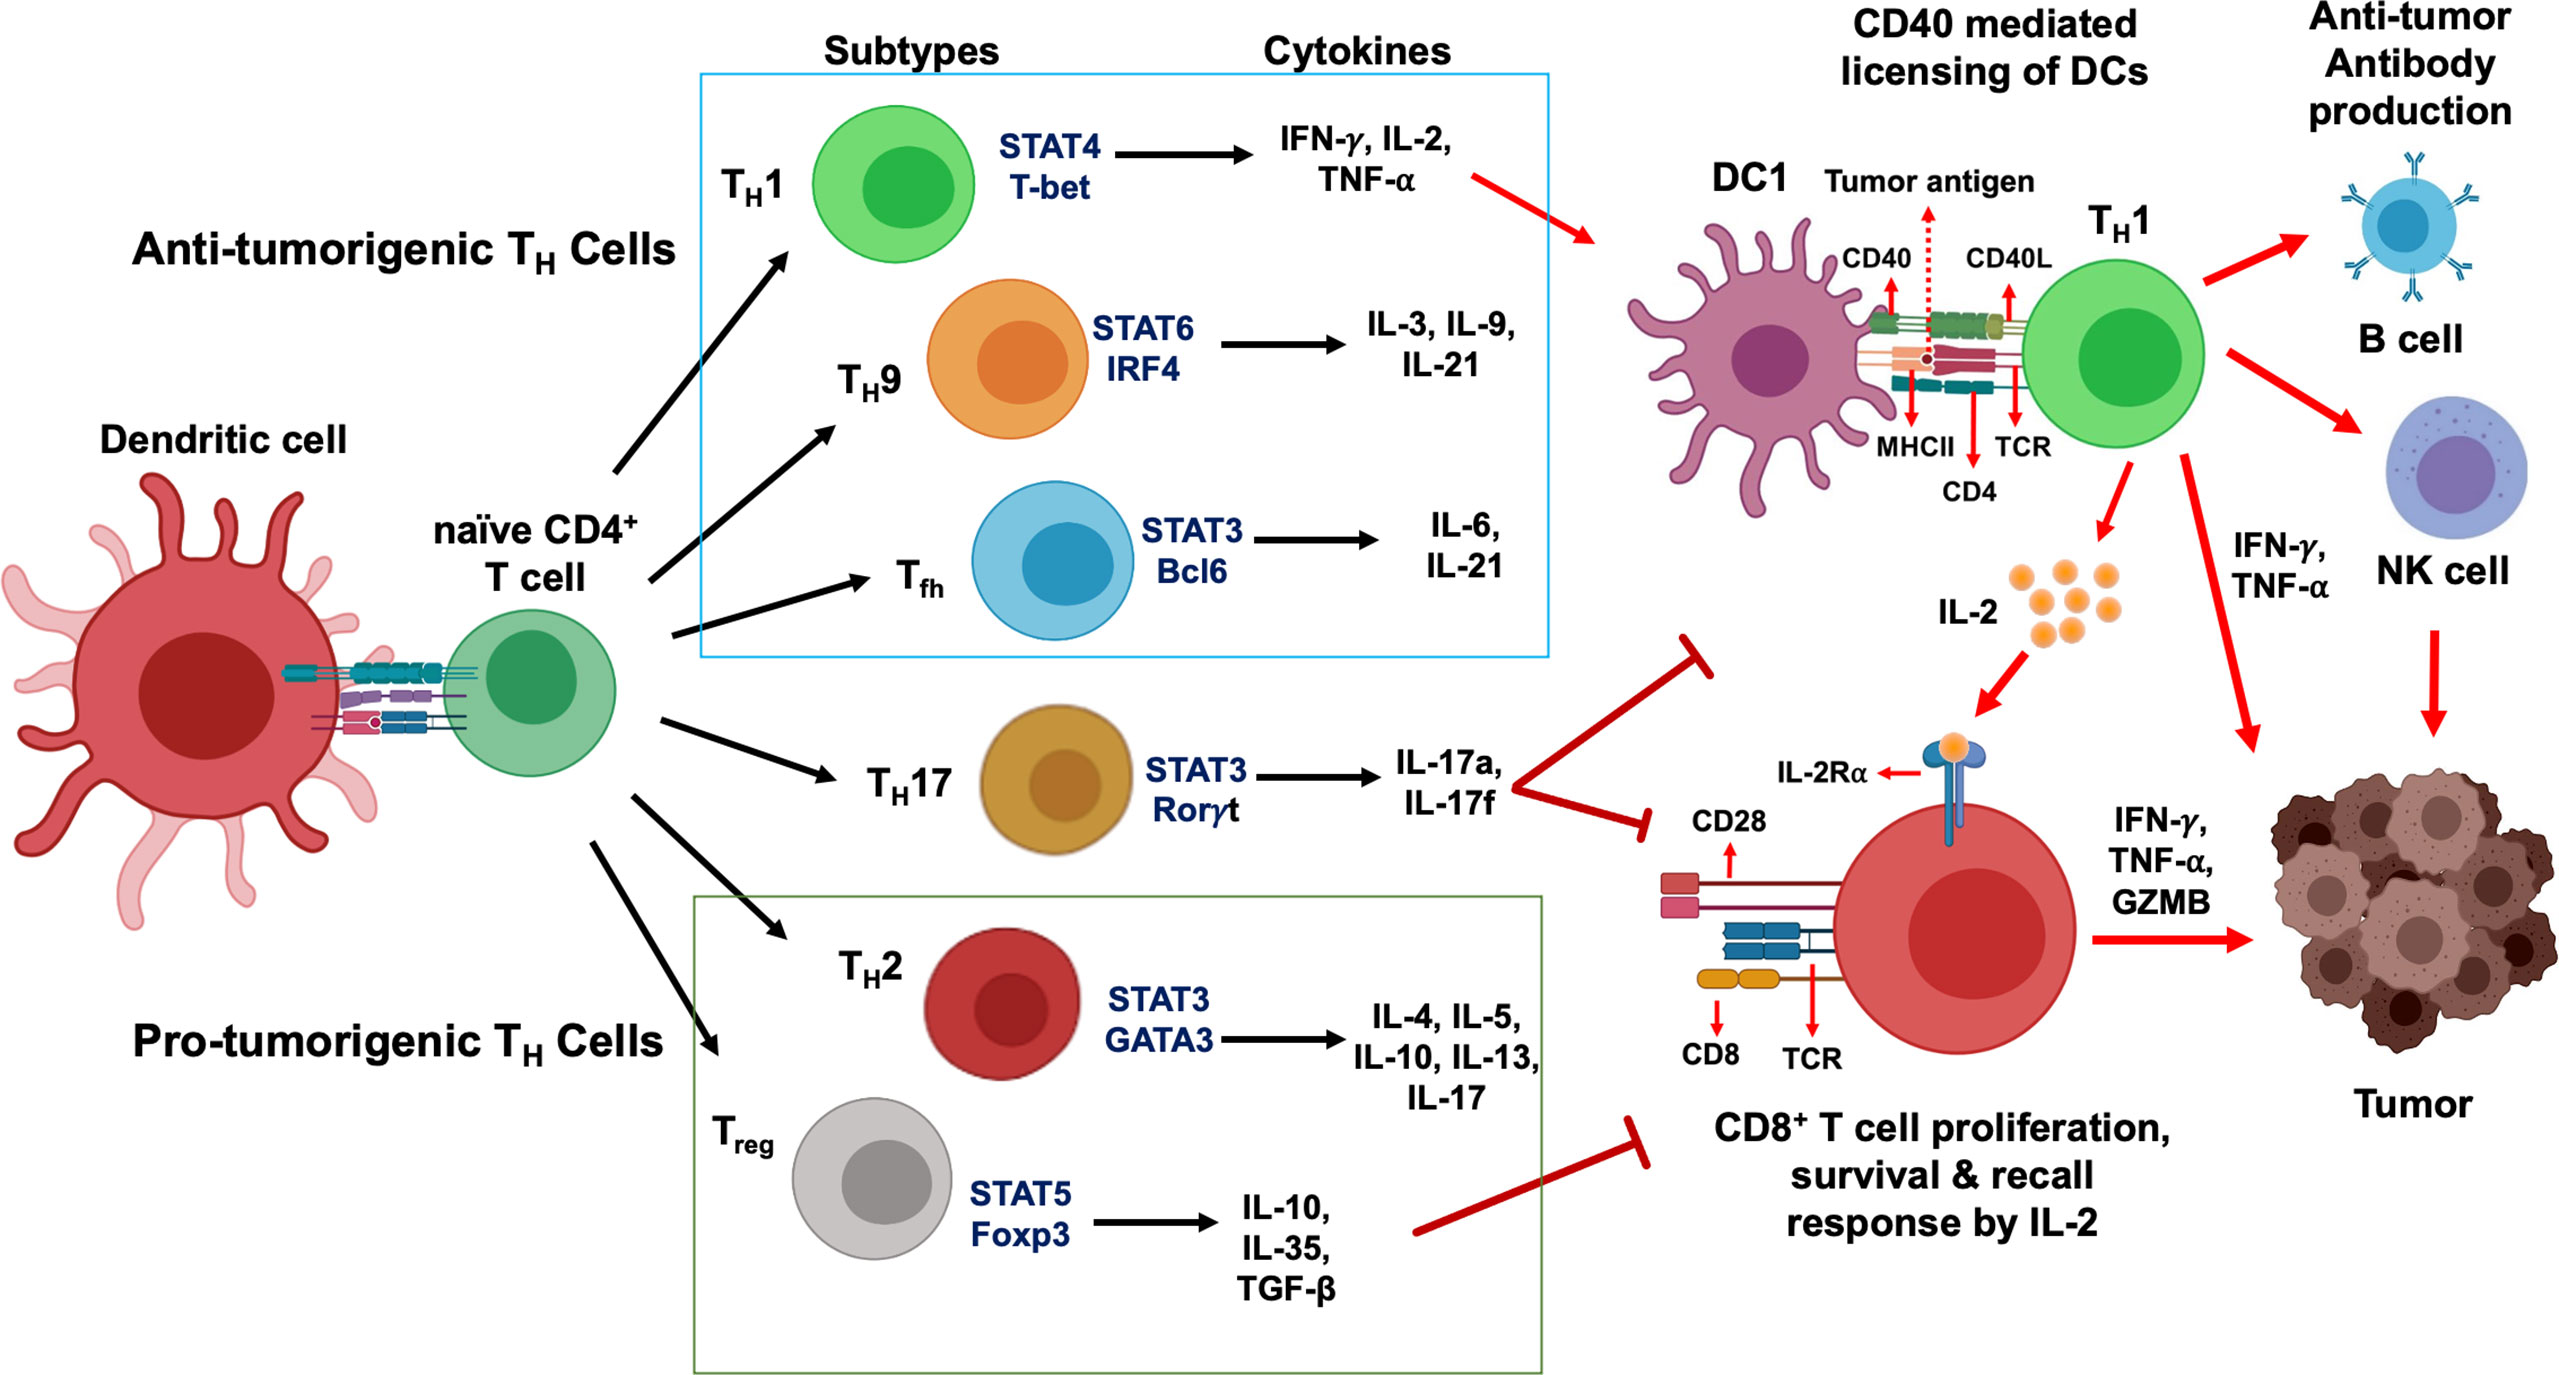 Frontiers | Differentiation and Regulation of TH Cells: A Balancing Act for Cancer Immunotherapy